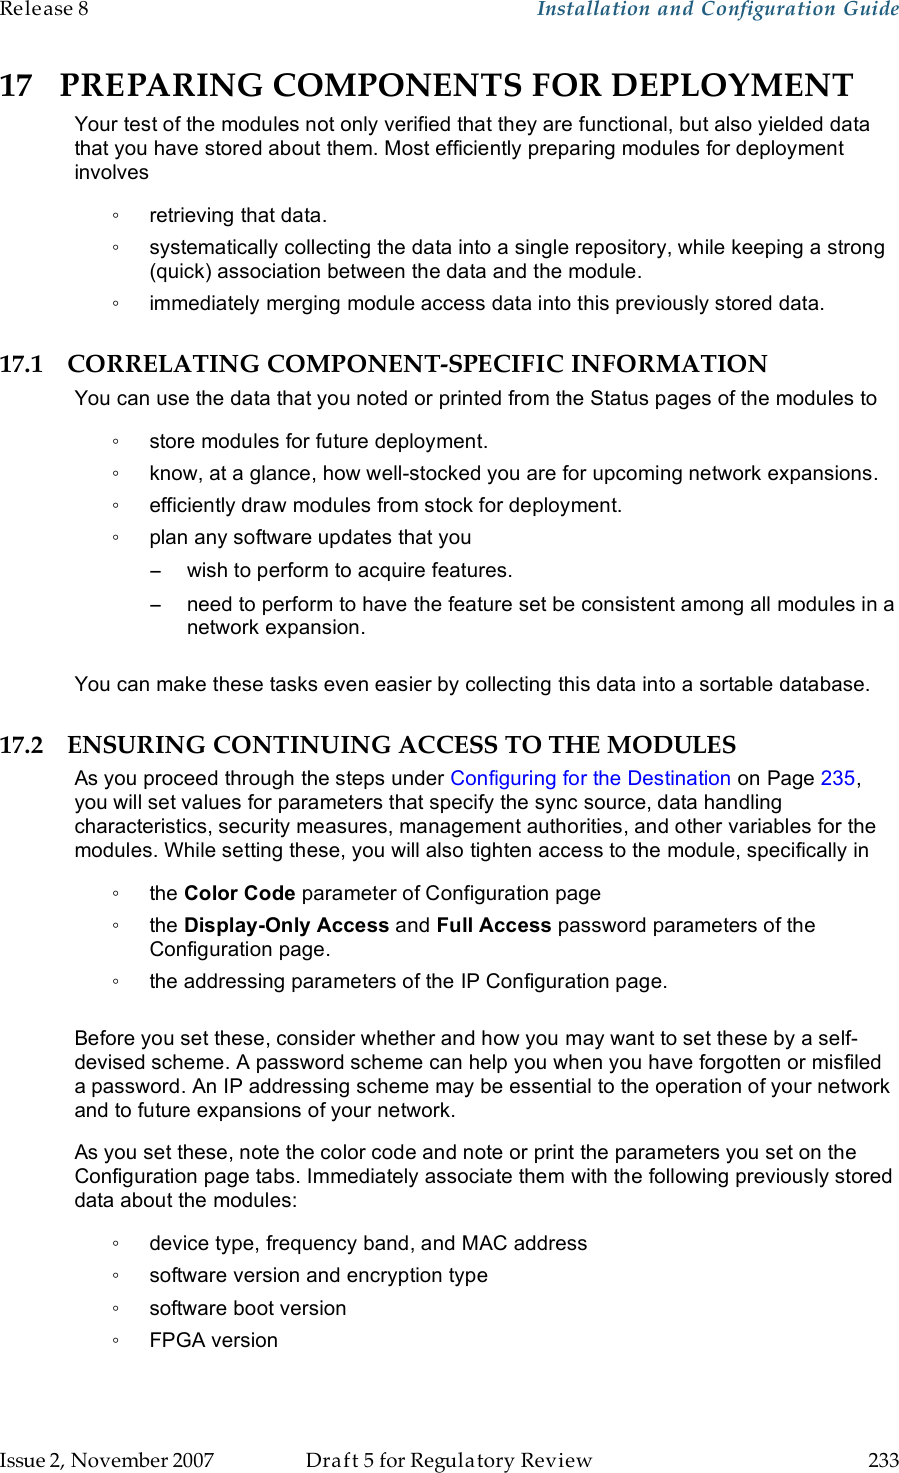 Release 8    Installation and Configuration Guide   Issue 2, November 2007  Draft 5 for Regulatory Review  233     17 PREPARING COMPONENTS FOR DEPLOYMENT Your test of the modules not only verified that they are functional, but also yielded data that you have stored about them. Most efficiently preparing modules for deployment involves ◦  retrieving that data. ◦  systematically collecting the data into a single repository, while keeping a strong (quick) association between the data and the module. ◦  immediately merging module access data into this previously stored data. 17.1 CORRELATING COMPONENT-SPECIFIC INFORMATION You can use the data that you noted or printed from the Status pages of the modules to  ◦  store modules for future deployment. ◦  know, at a glance, how well-stocked you are for upcoming network expansions. ◦  efficiently draw modules from stock for deployment. ◦  plan any software updates that you −  wish to perform to acquire features. −  need to perform to have the feature set be consistent among all modules in a network expansion.  You can make these tasks even easier by collecting this data into a sortable database. 17.2 ENSURING CONTINUING ACCESS TO THE MODULES As you proceed through the steps under Configuring for the Destination on Page 235, you will set values for parameters that specify the sync source, data handling characteristics, security measures, management authorities, and other variables for the modules. While setting these, you will also tighten access to the module, specifically in ◦  the Color Code parameter of Configuration page ◦  the Display-Only Access and Full Access password parameters of the Configuration page. ◦  the addressing parameters of the IP Configuration page.  Before you set these, consider whether and how you may want to set these by a self-devised scheme. A password scheme can help you when you have forgotten or misfiled a password. An IP addressing scheme may be essential to the operation of your network and to future expansions of your network. As you set these, note the color code and note or print the parameters you set on the Configuration page tabs. Immediately associate them with the following previously stored data about the modules: ◦  device type, frequency band, and MAC address ◦  software version and encryption type ◦  software boot version ◦  FPGA version 